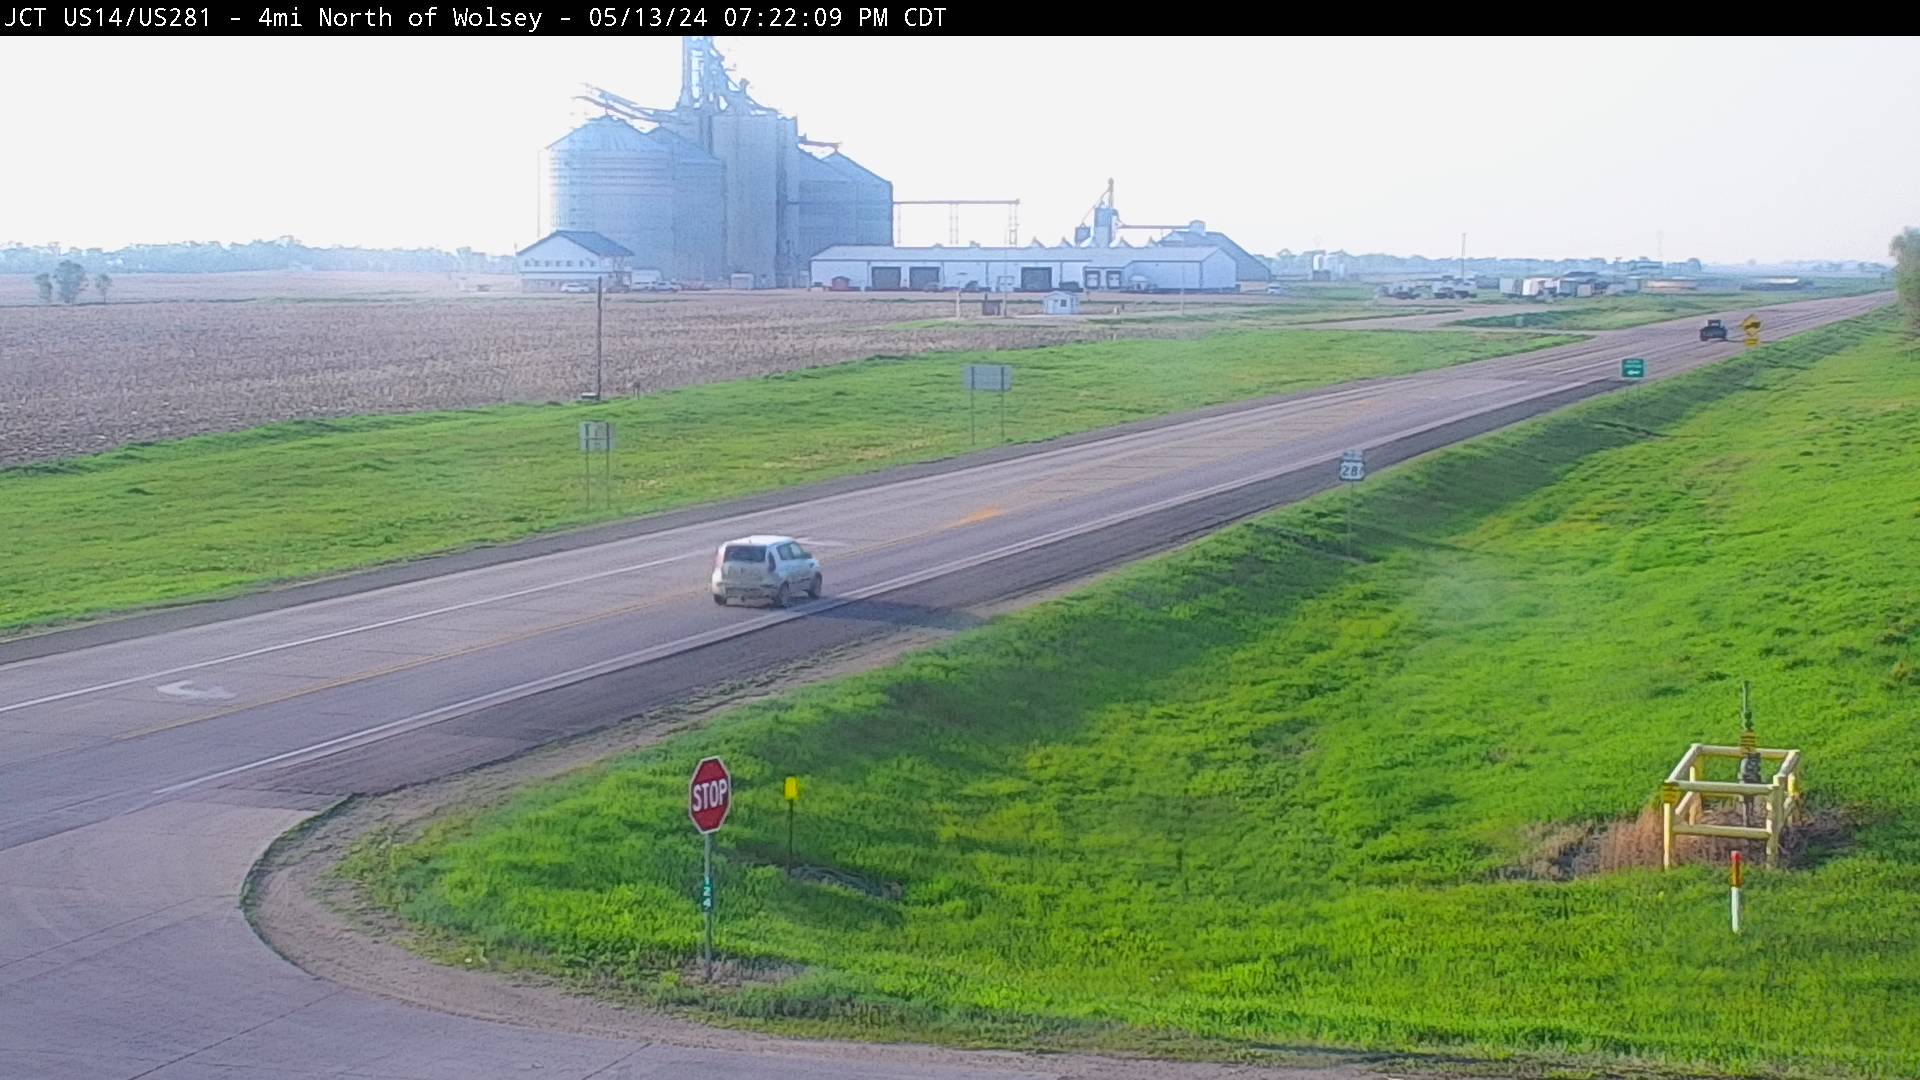 4 miles north of town at junction US-14 & US-281 - North Traffic Camera